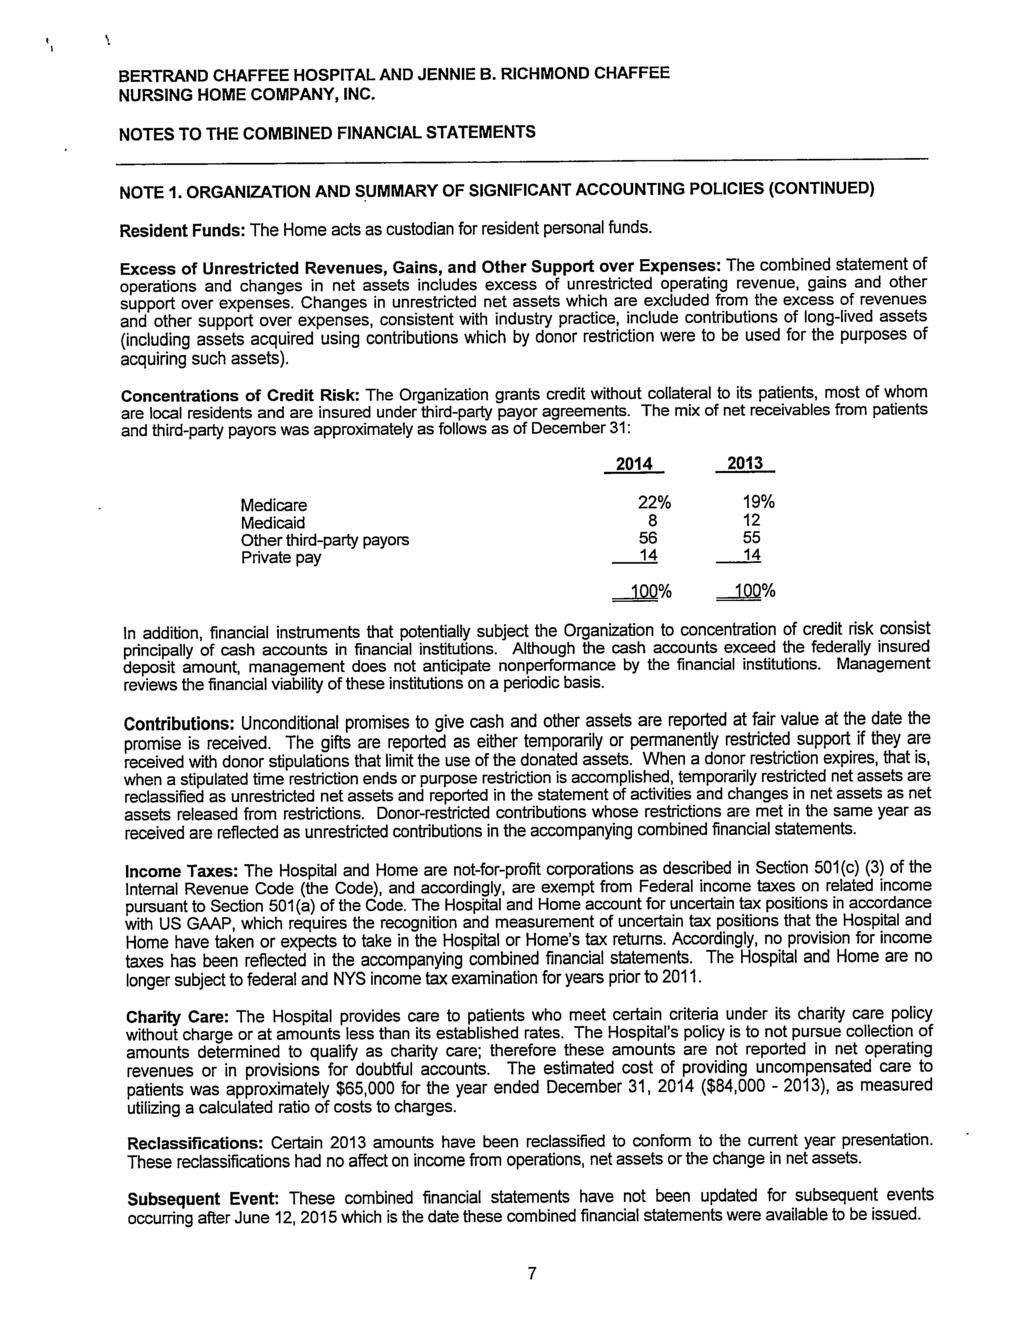 BERTRAND CHAFFEE HOSPITAL AND JENNIE B. RICHMOND CHAFFEE NURSING HOME COMPANY, INC. NOTES TO THE COMBINED FINANCIAL STATEMENTS NOTE 1.